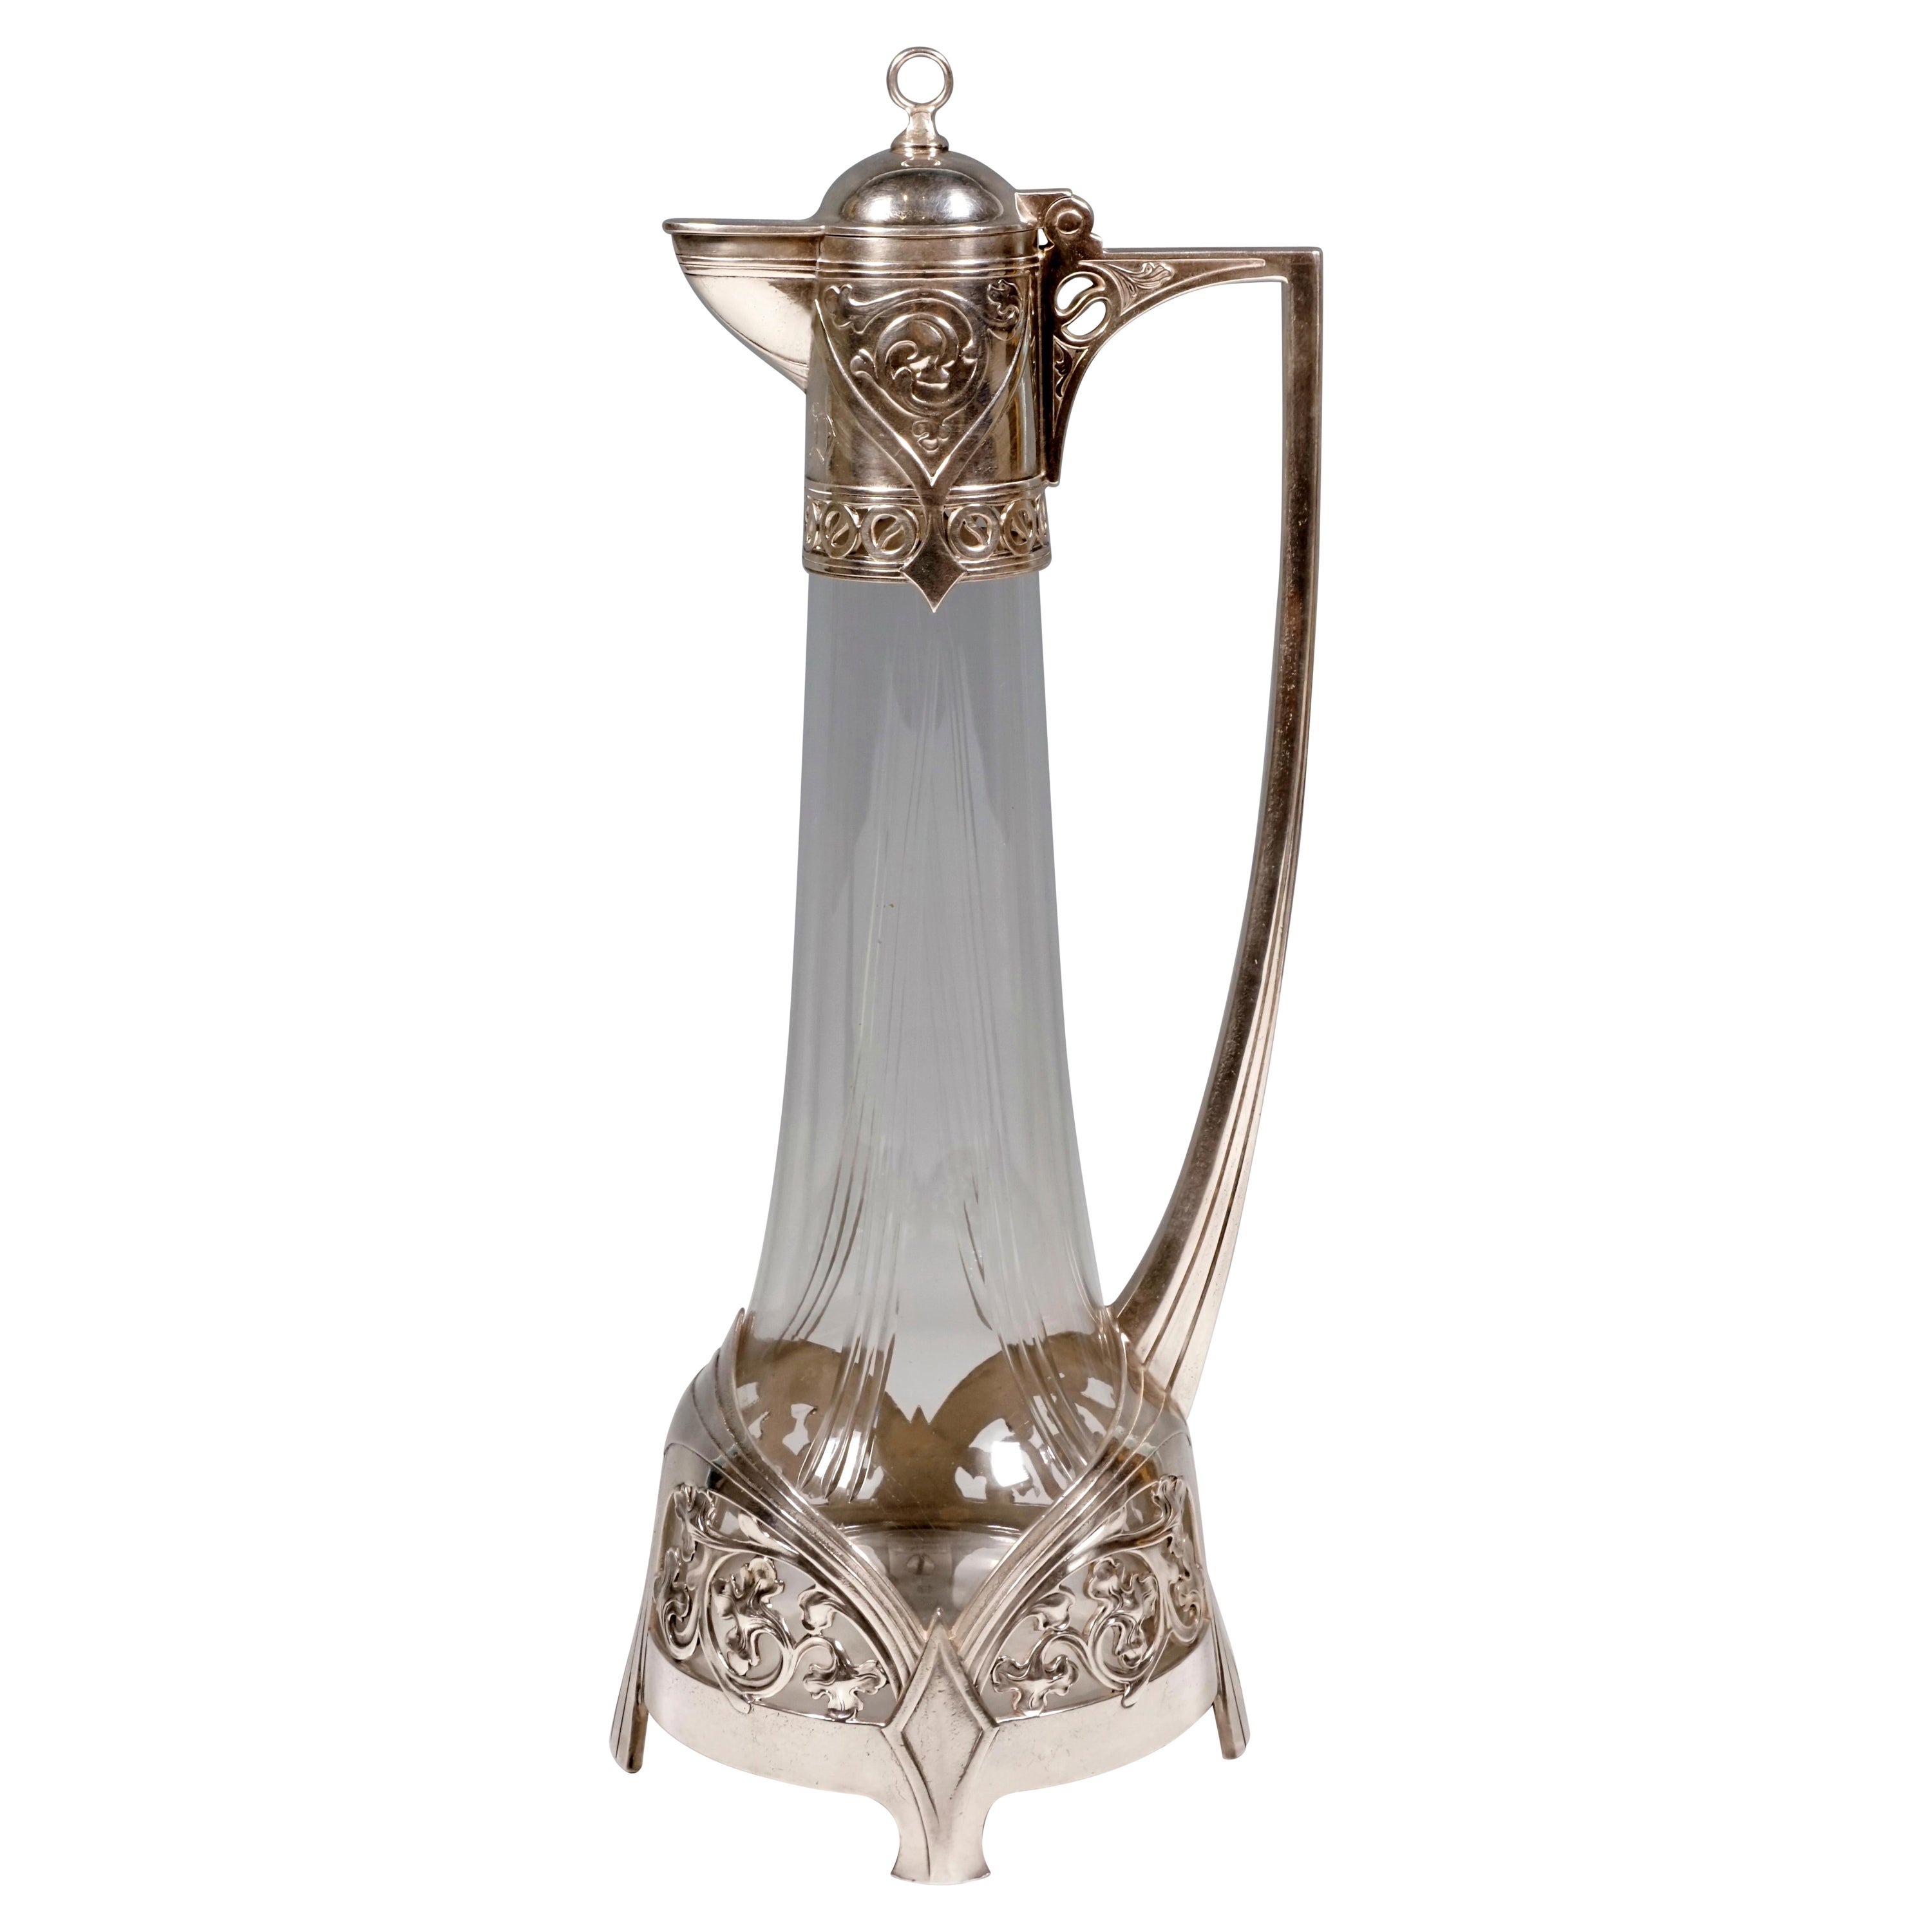 Art Nouveau Glass Decanter with Silver Plated Mount, WMF, Germany, 1903-1910